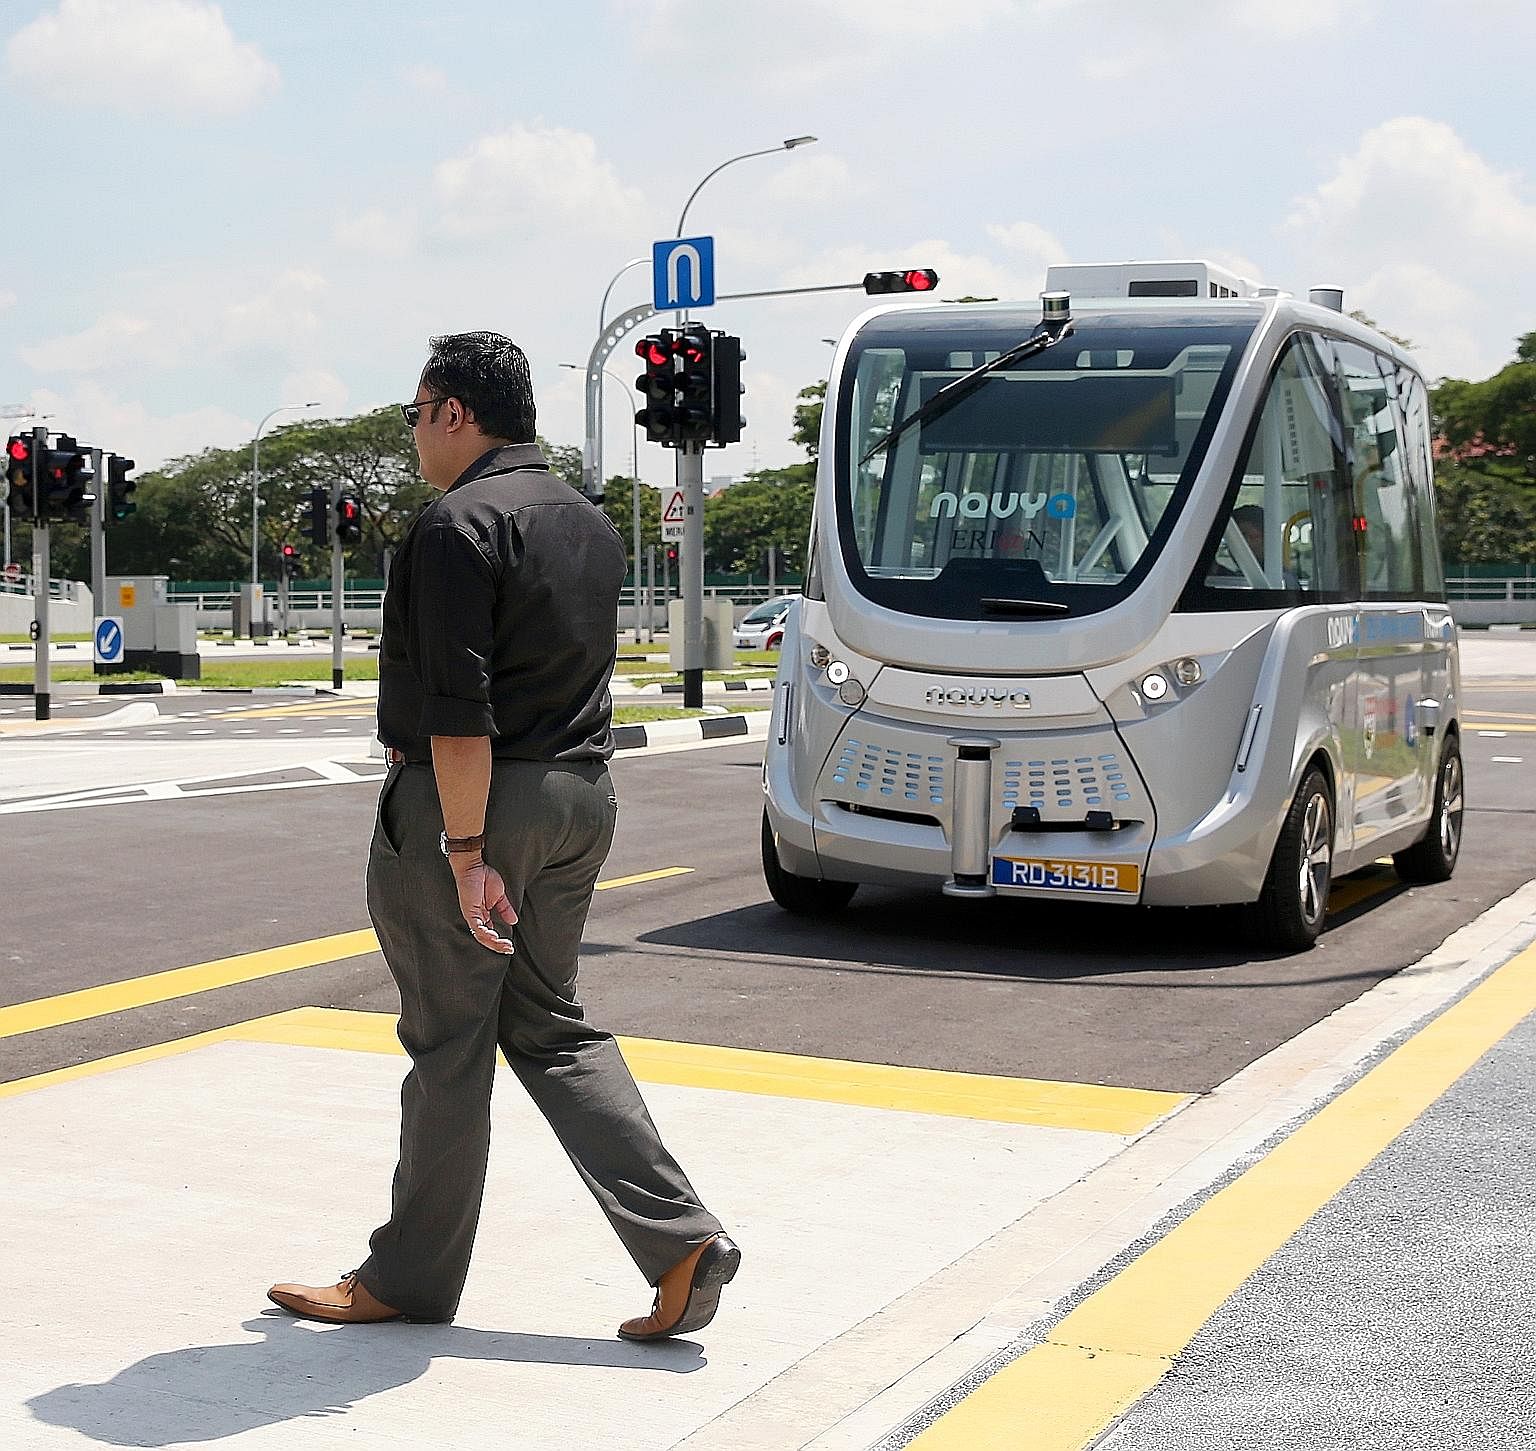 A "jaywalker" strolling in front of a self-driving shuttle bus during a test run. This past week, the Government unveiled plans for robot buses to operate in three towns by 2022.